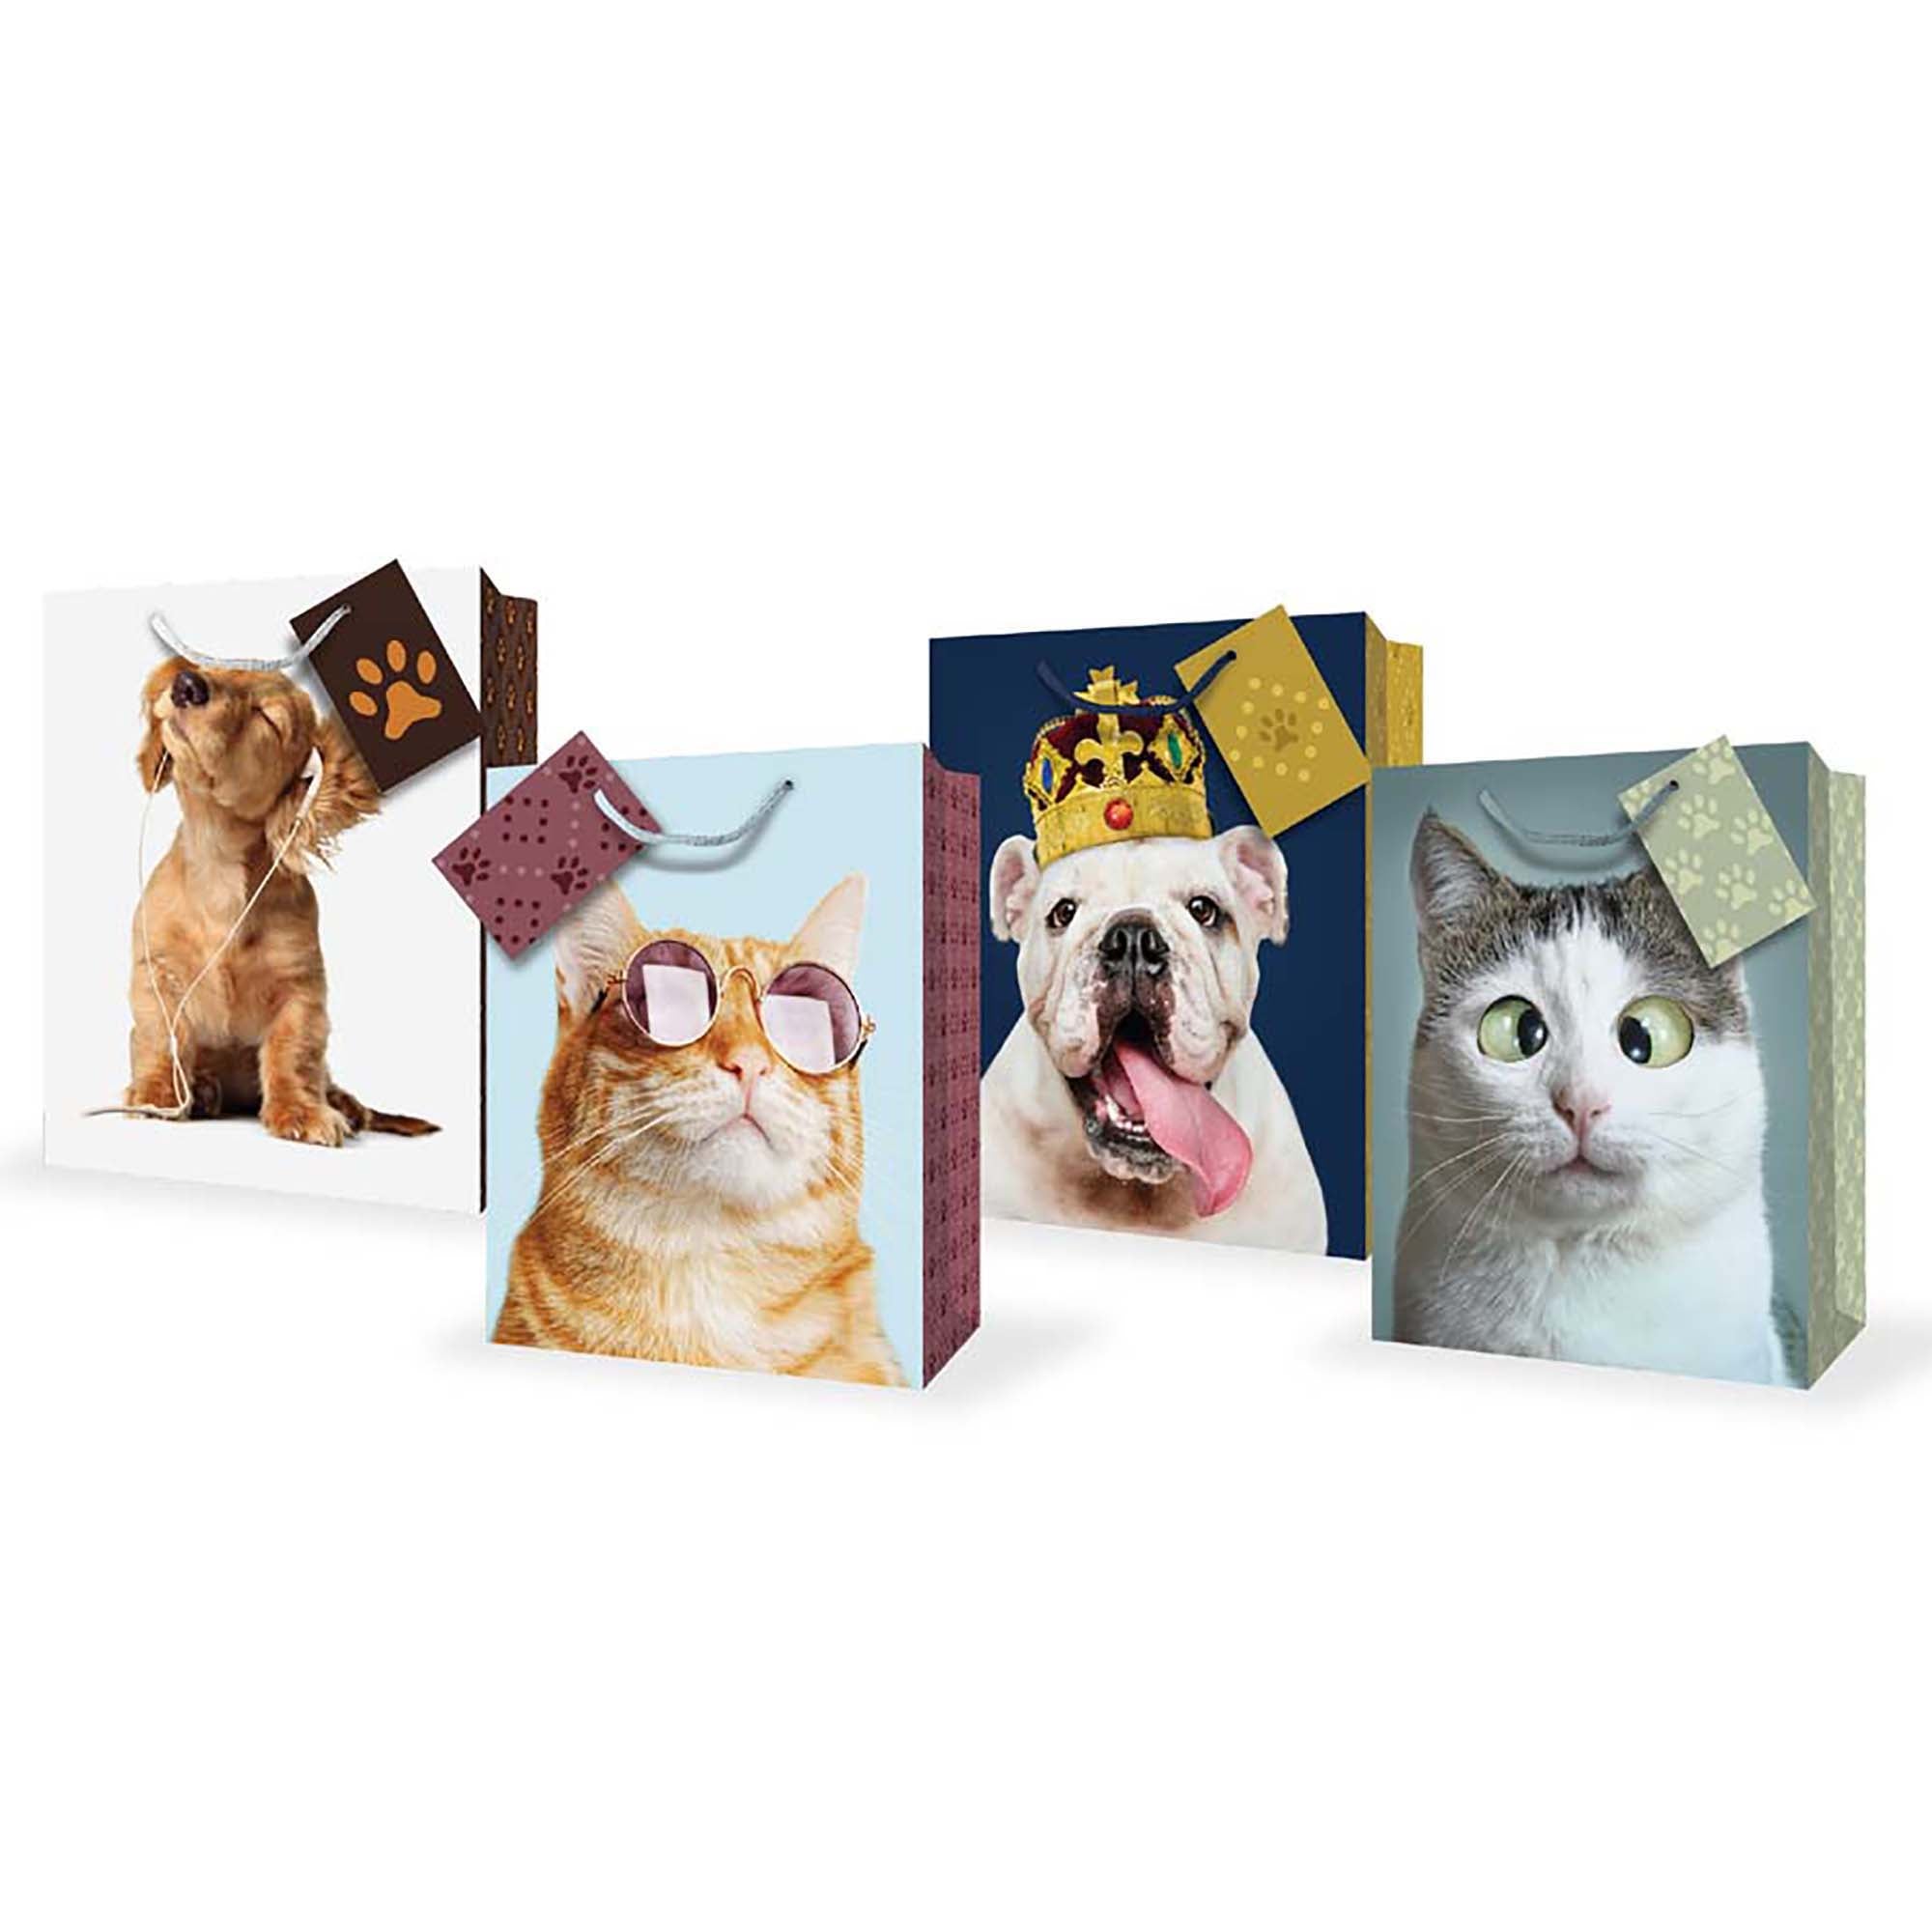 Mill Brook Gift Bag - Cute Canines Large 10.5x12.75x5.5in